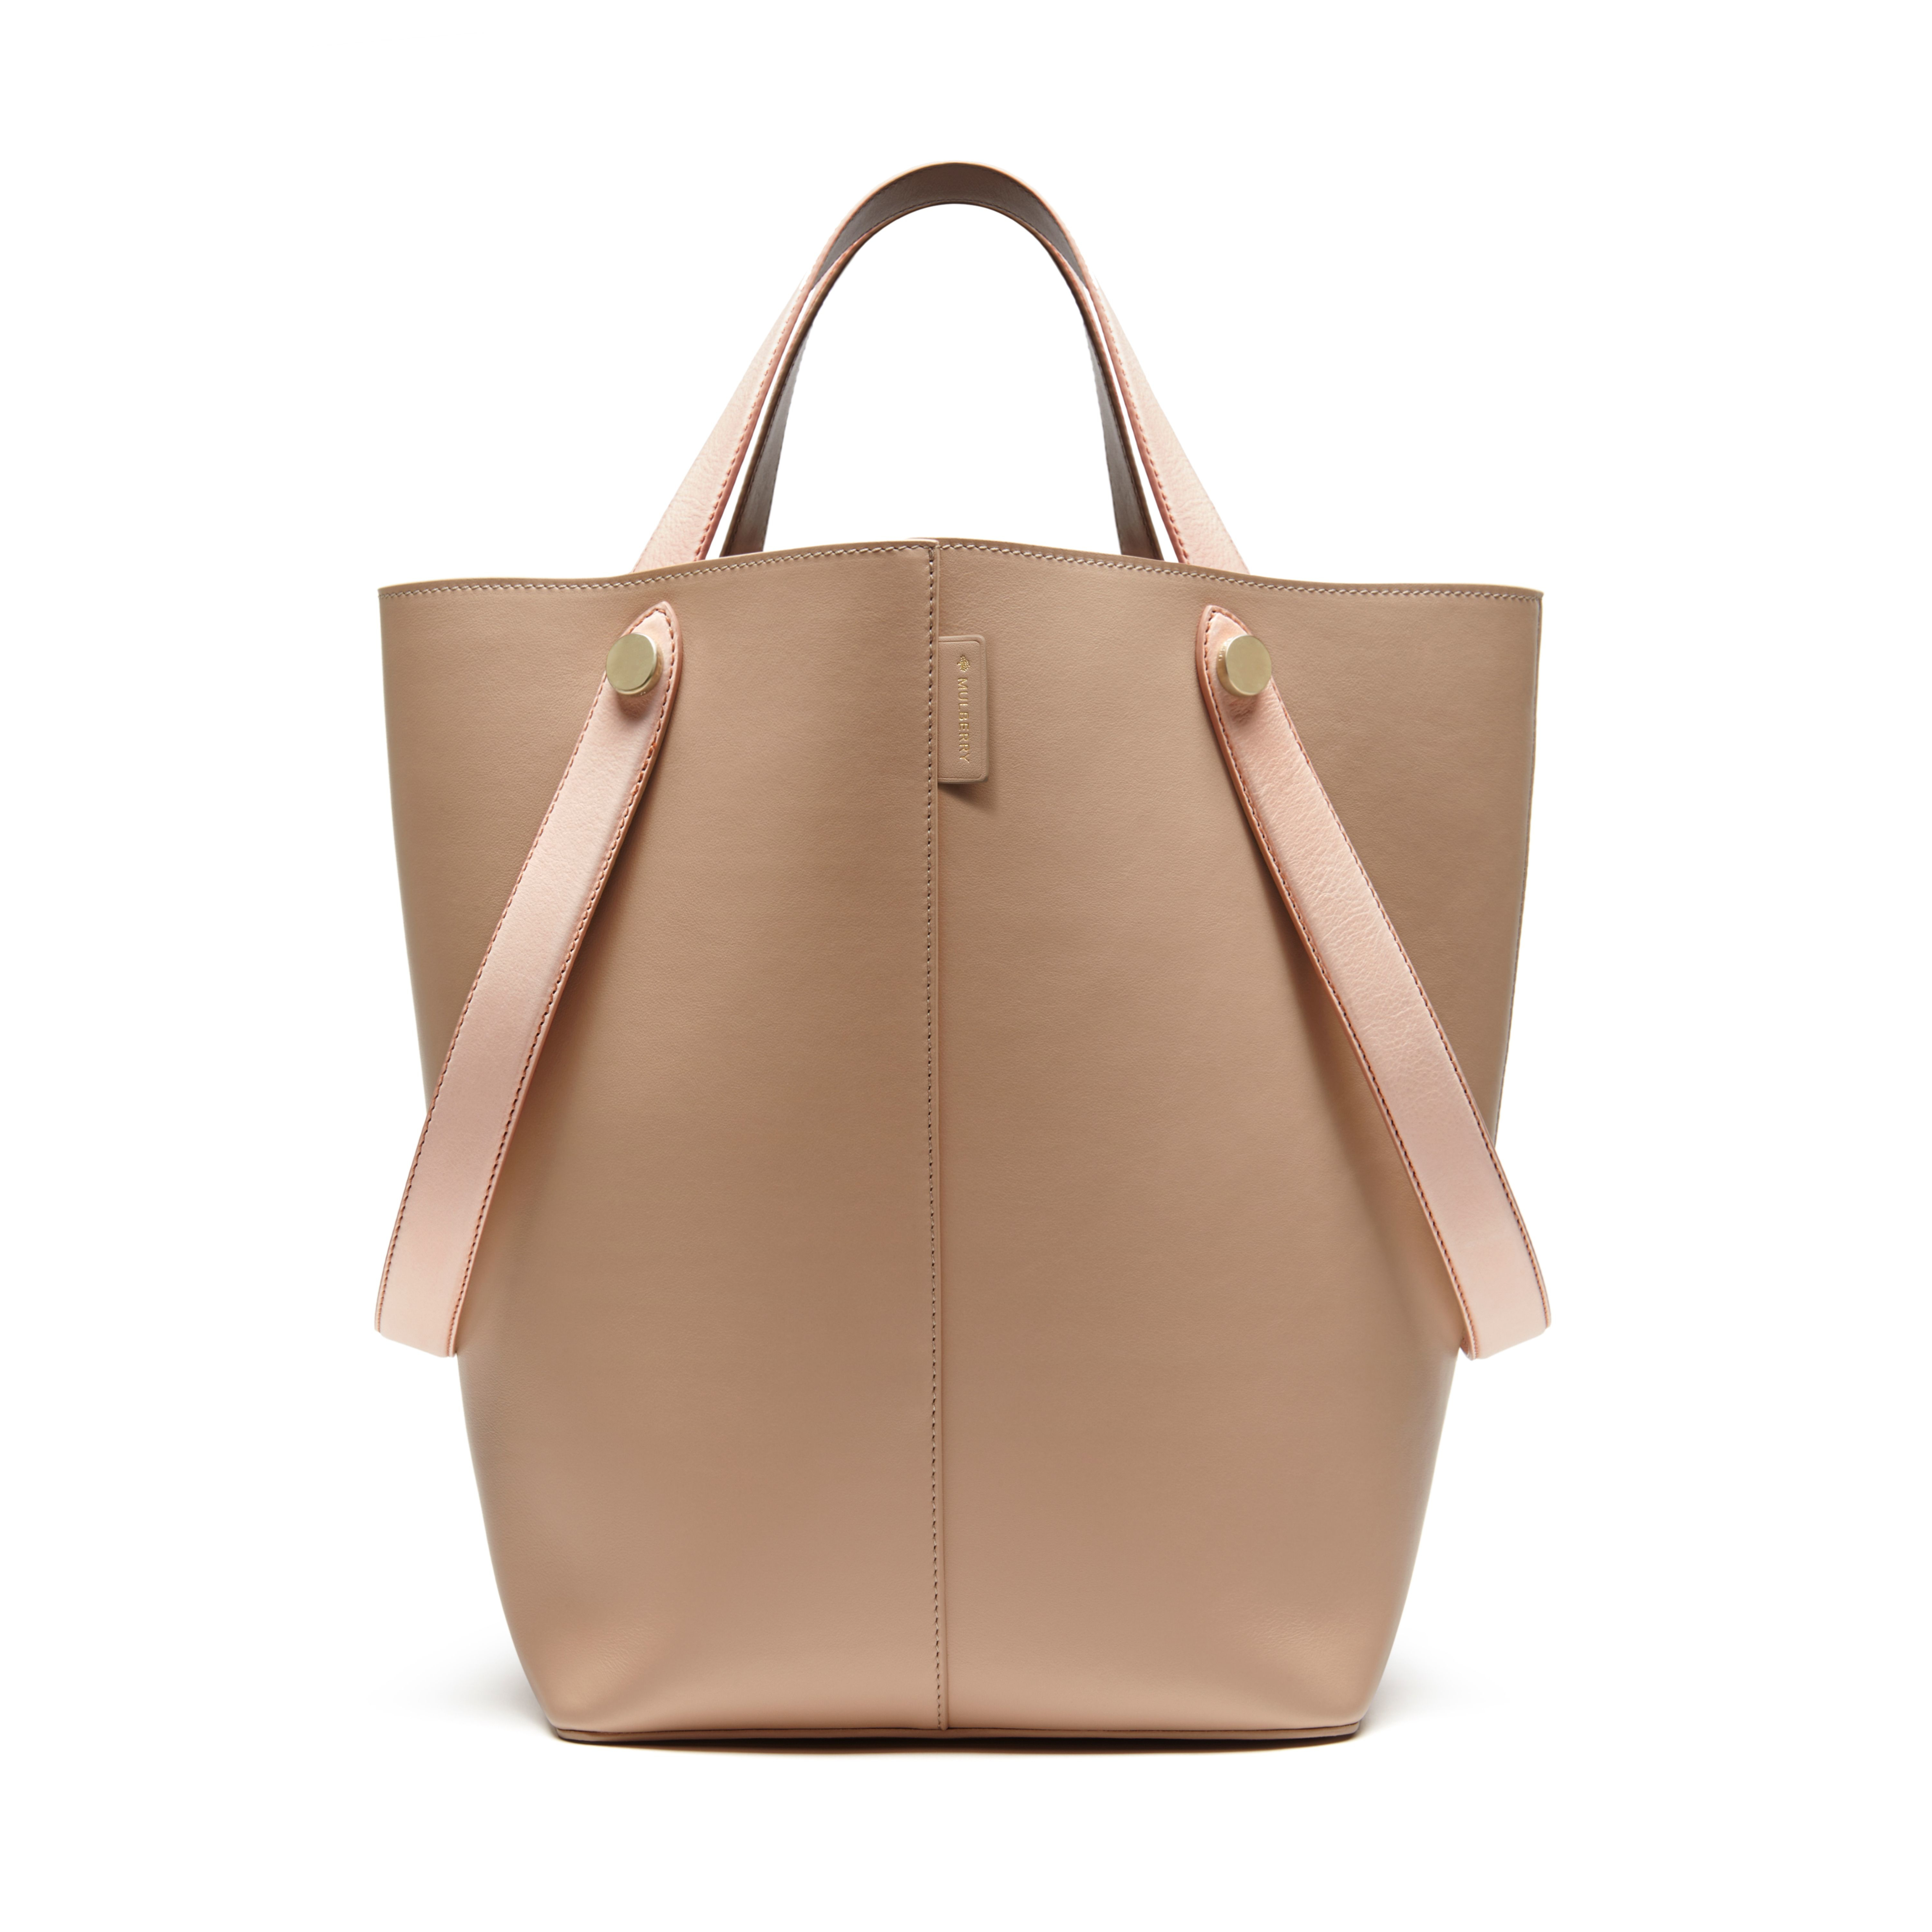 Mulberry Kite Leather Tote in Nude (Natural) - Lyst